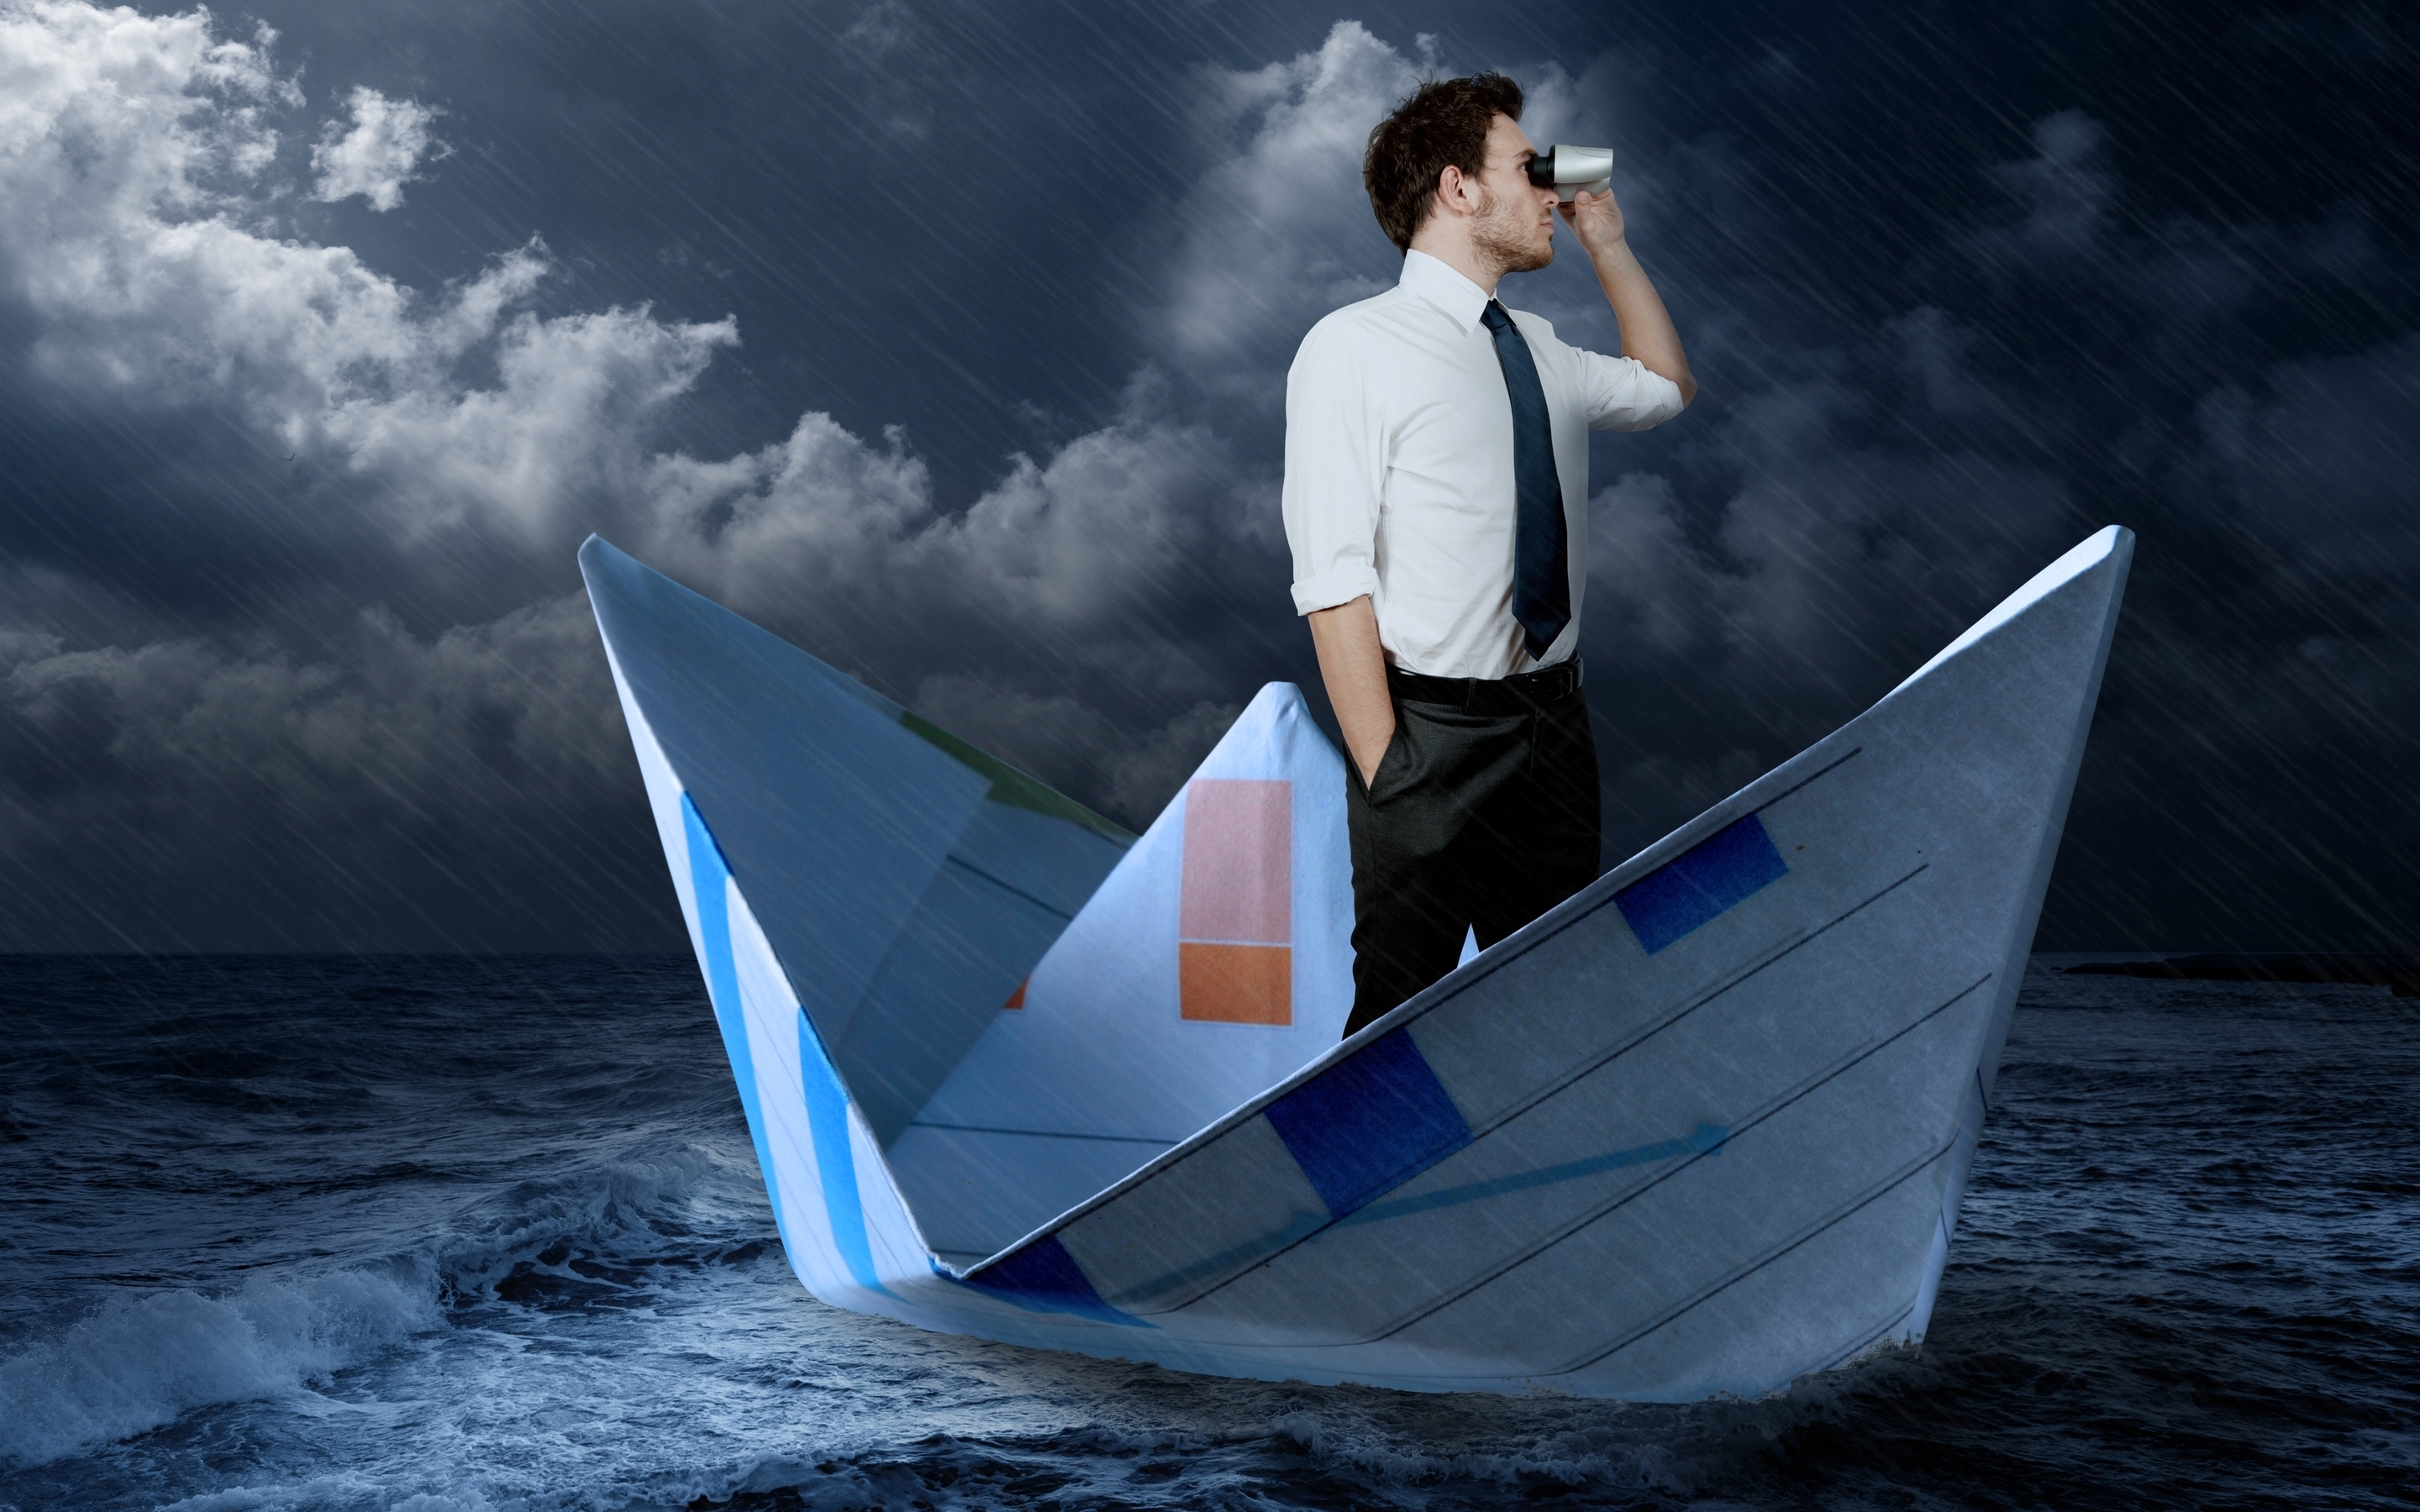 Man in Paper Boat for 2880 x 1800 Retina Display resolution